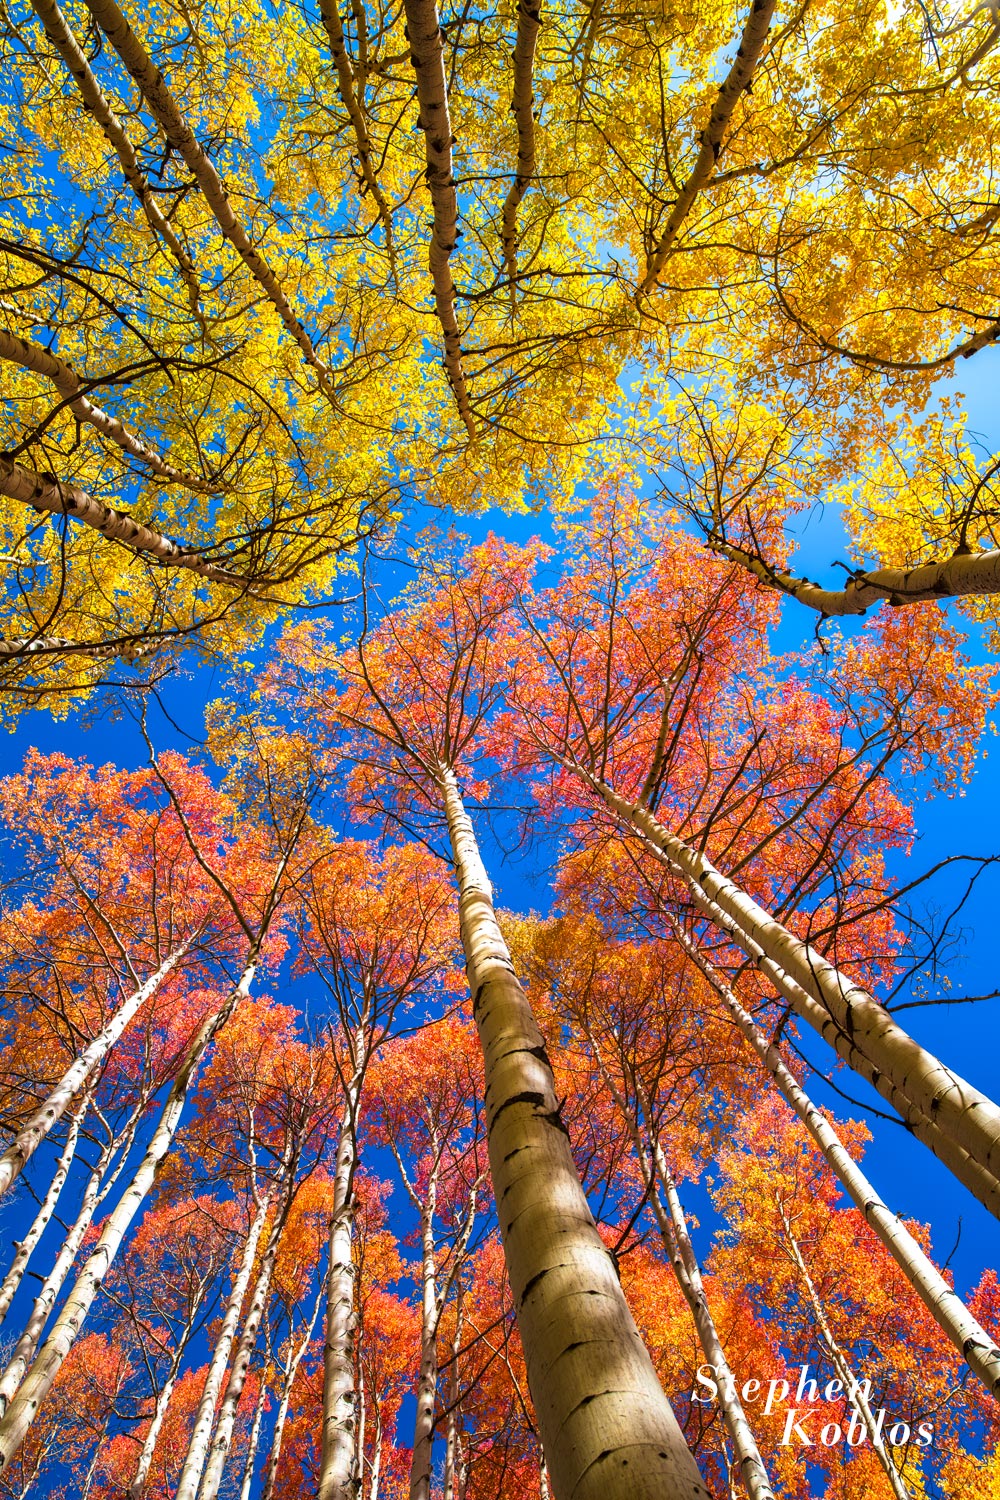 This picture depicts the different colors that aspen leaves can have in the fall. Limited Edition of 100